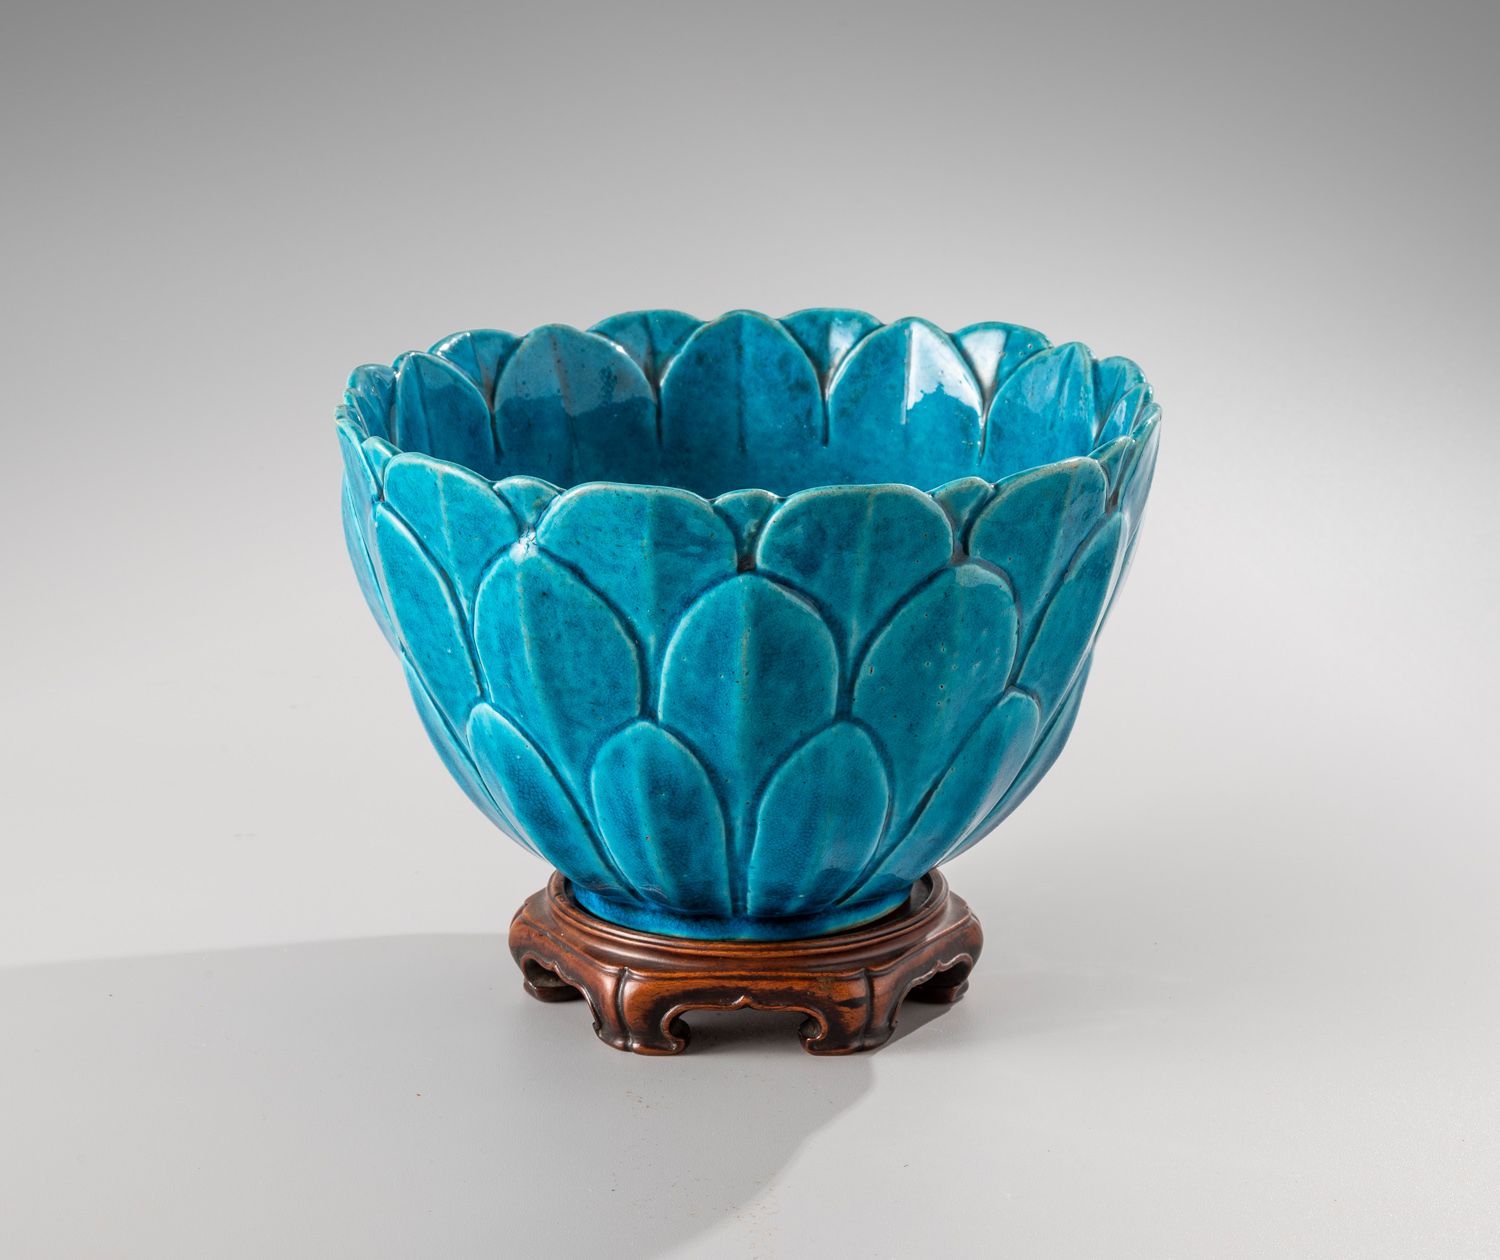 Null CHINA, 18th century

Cup in the shape of a lotus flower, in turquoise glaze&hellip;